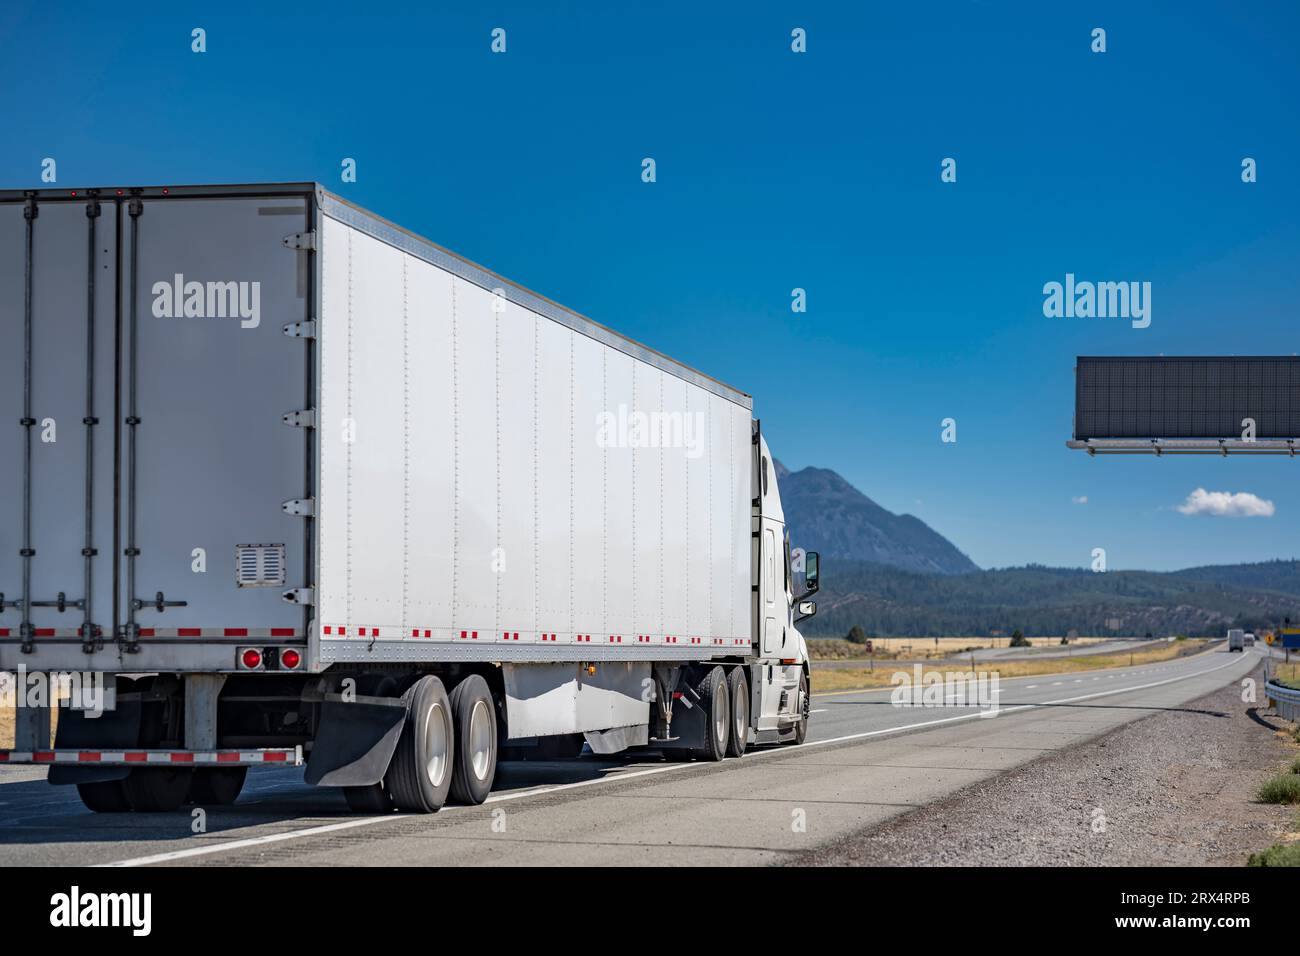 Industrial grade long hauler carrier white big rig semi truck tractor transporting commercial cargo in dry van semi trailer running on the straight di Stock Photo